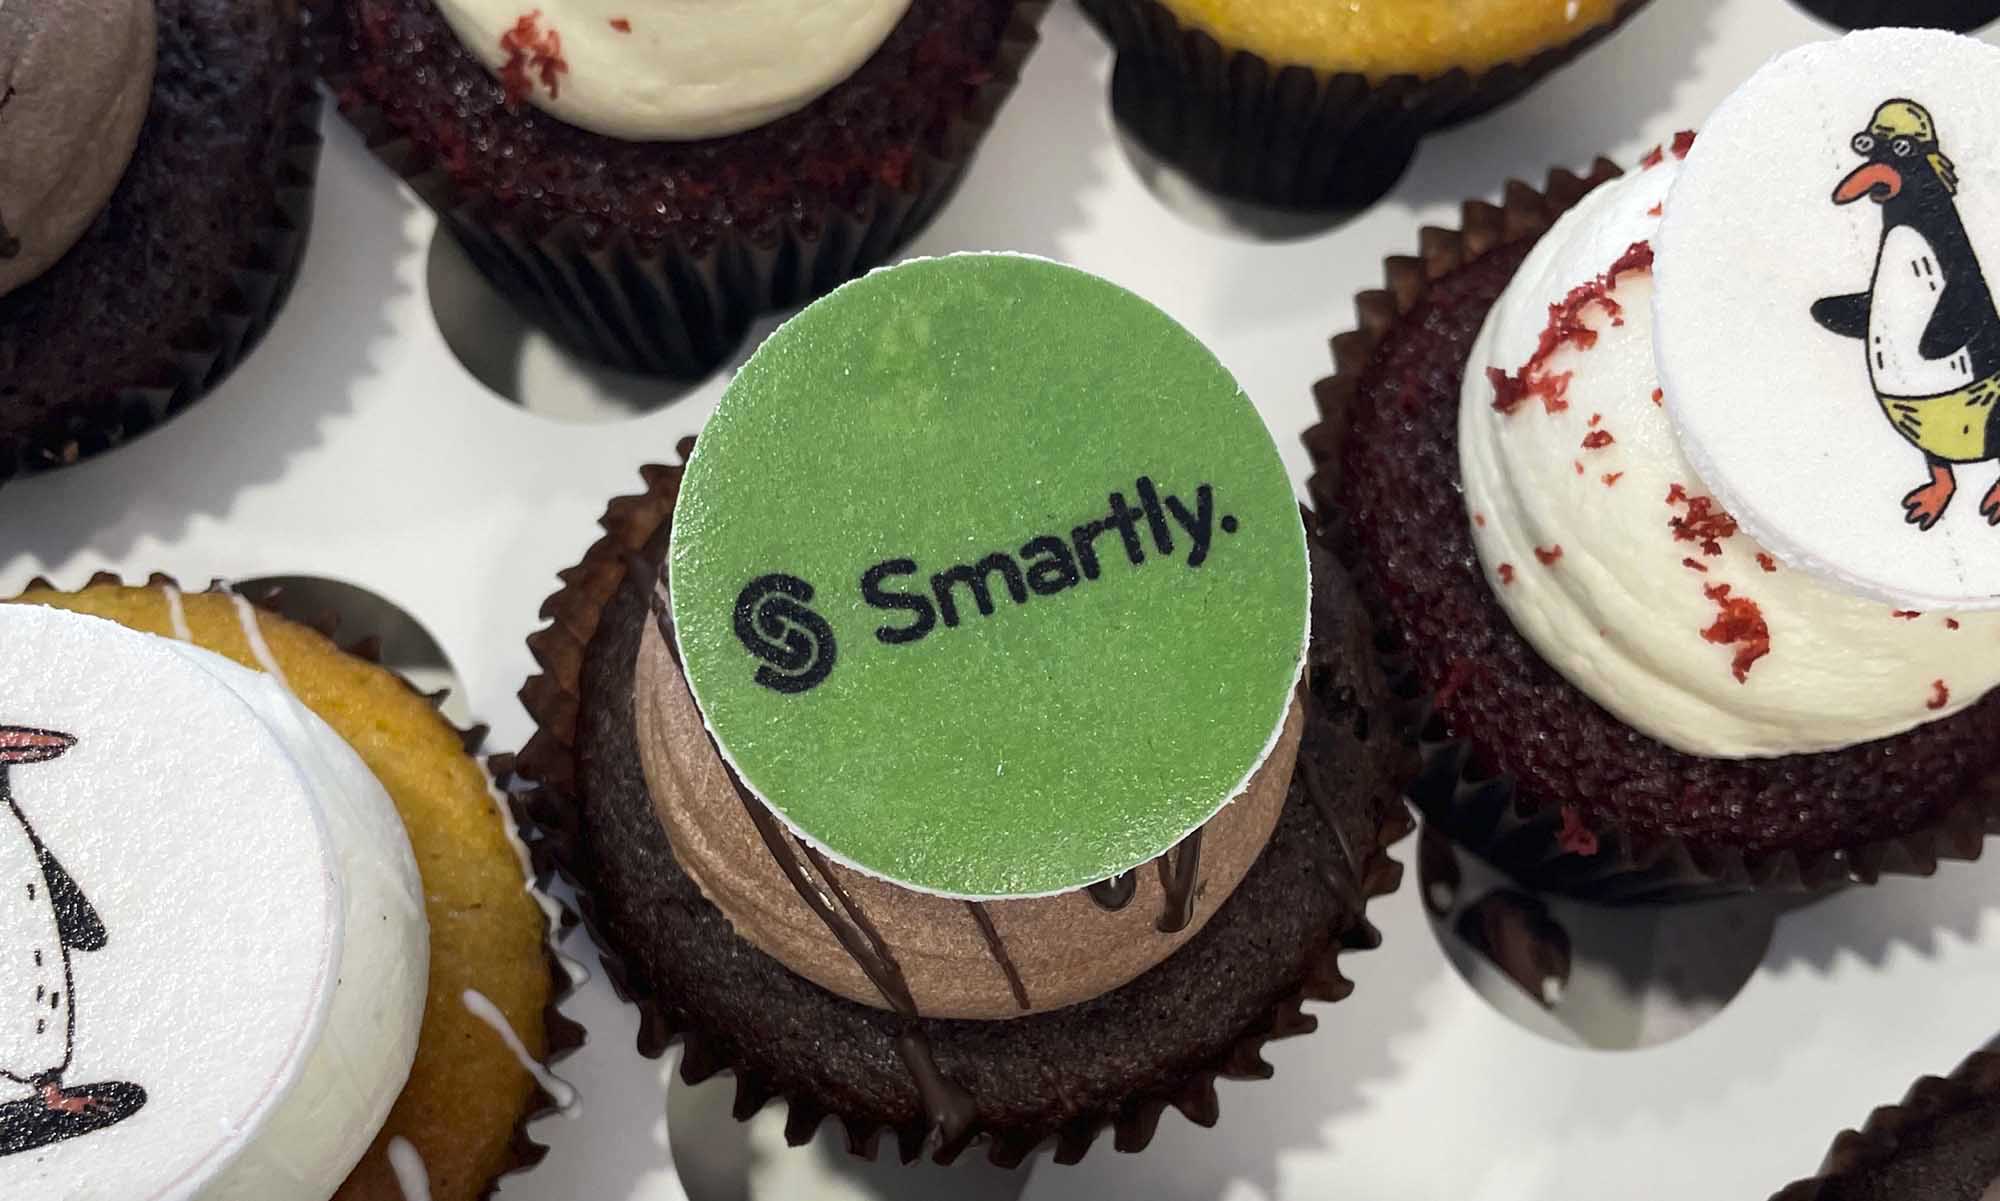 Smartly branded cupcakes from the launch party